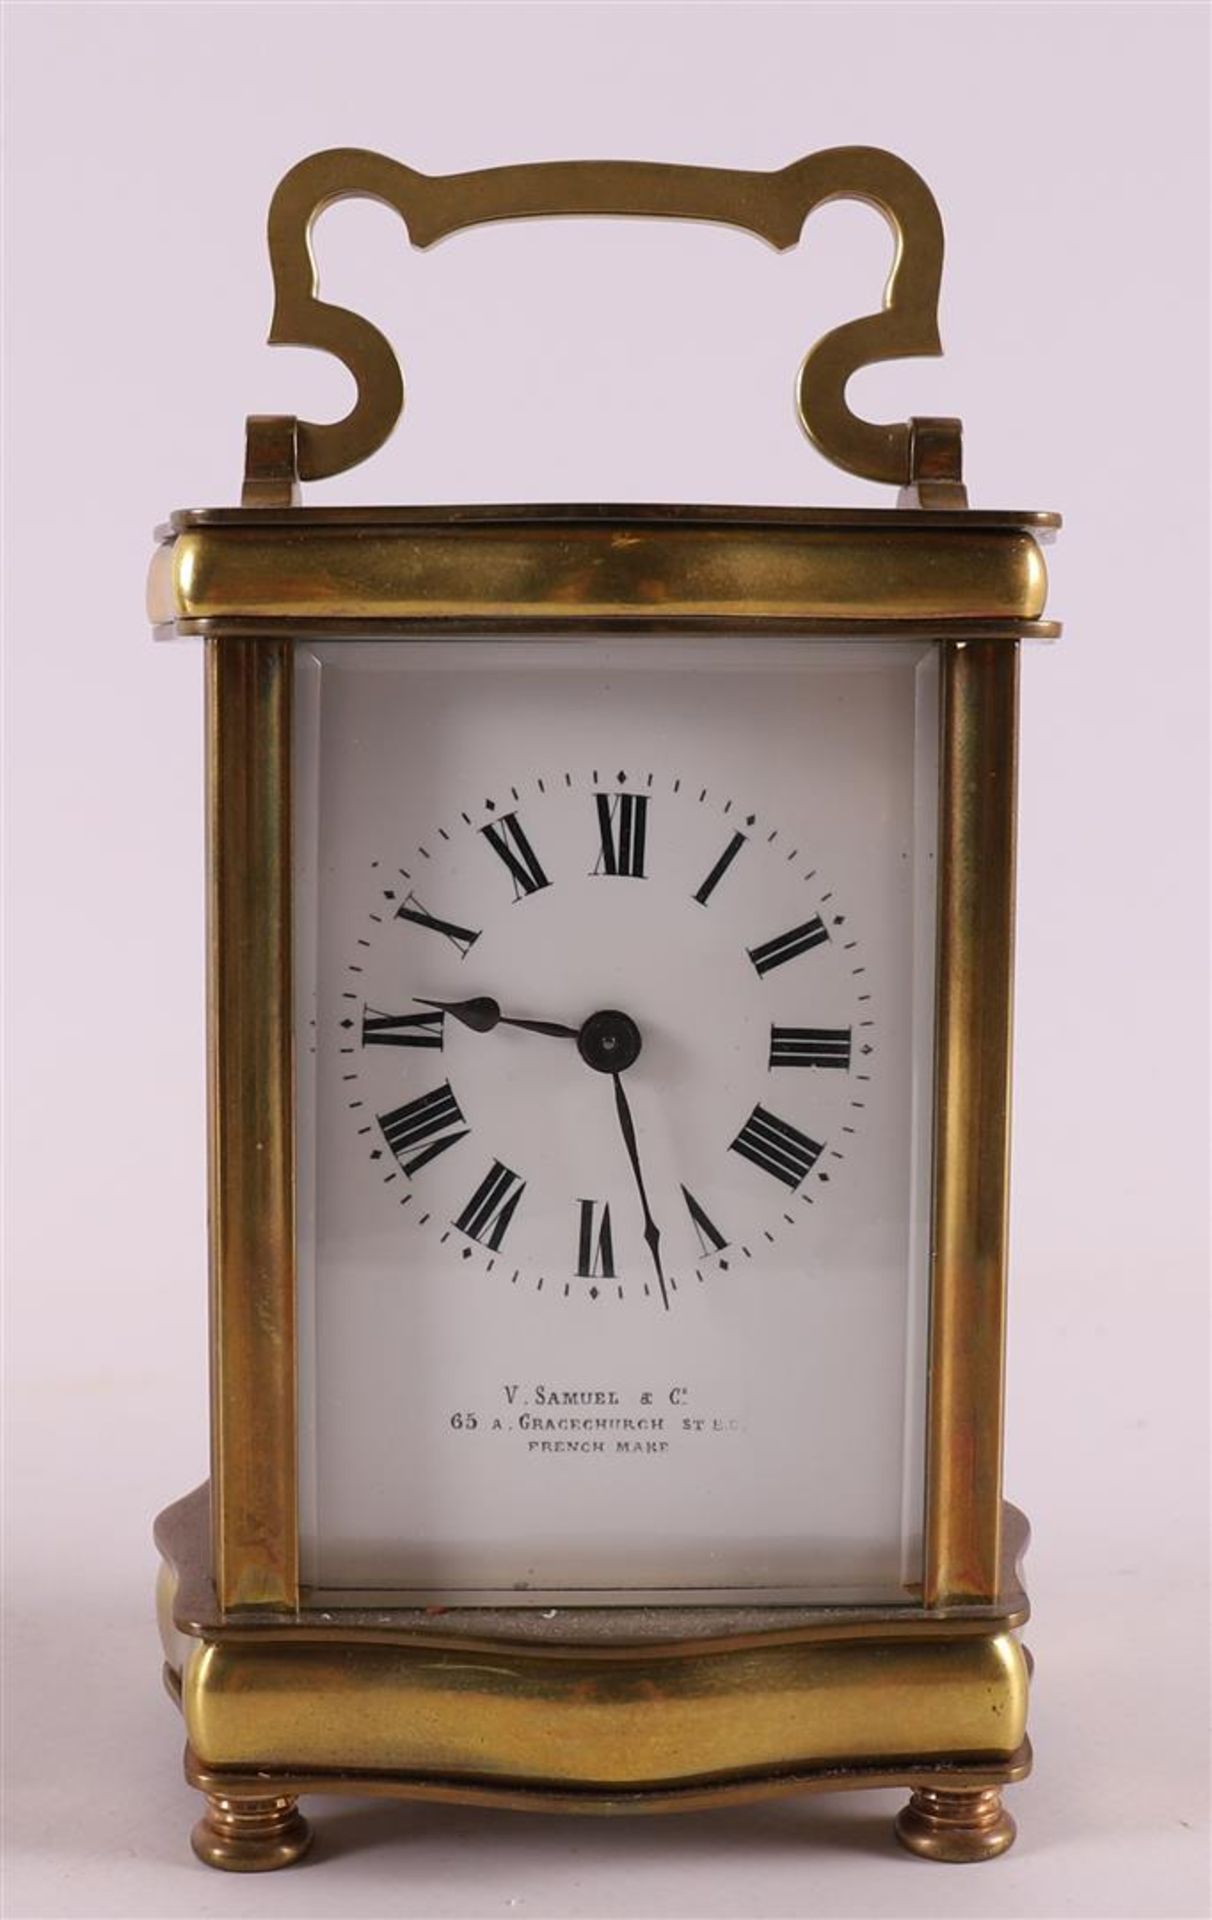 A travel clock in brass housing and original case, France, - Image 2 of 8